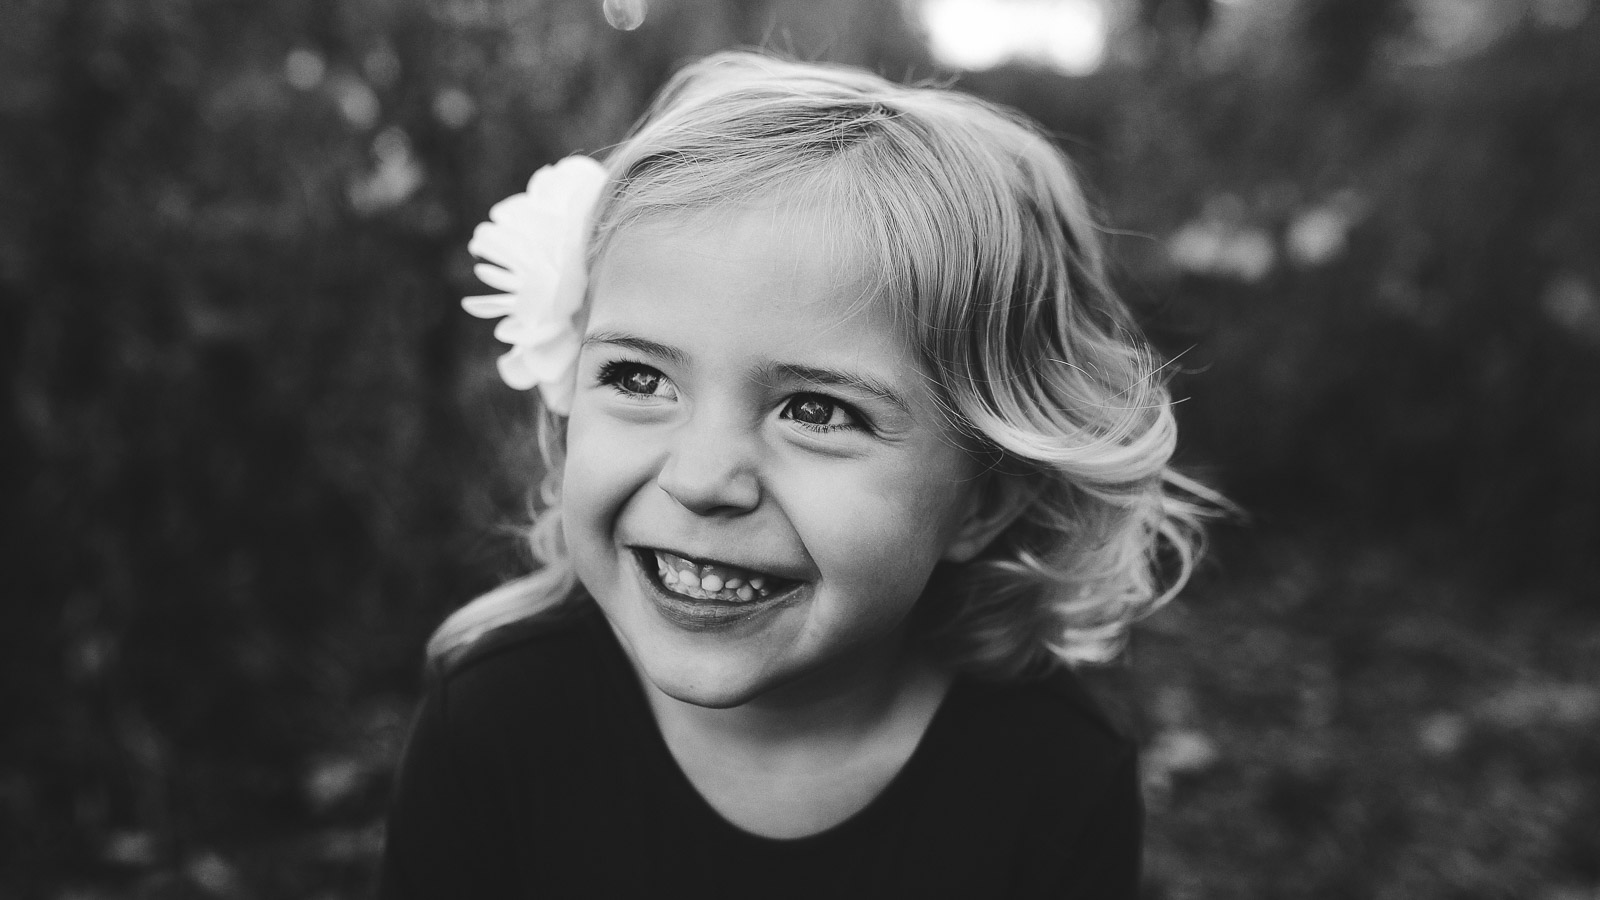 black and white photograph of a young girl smiling outdoors.